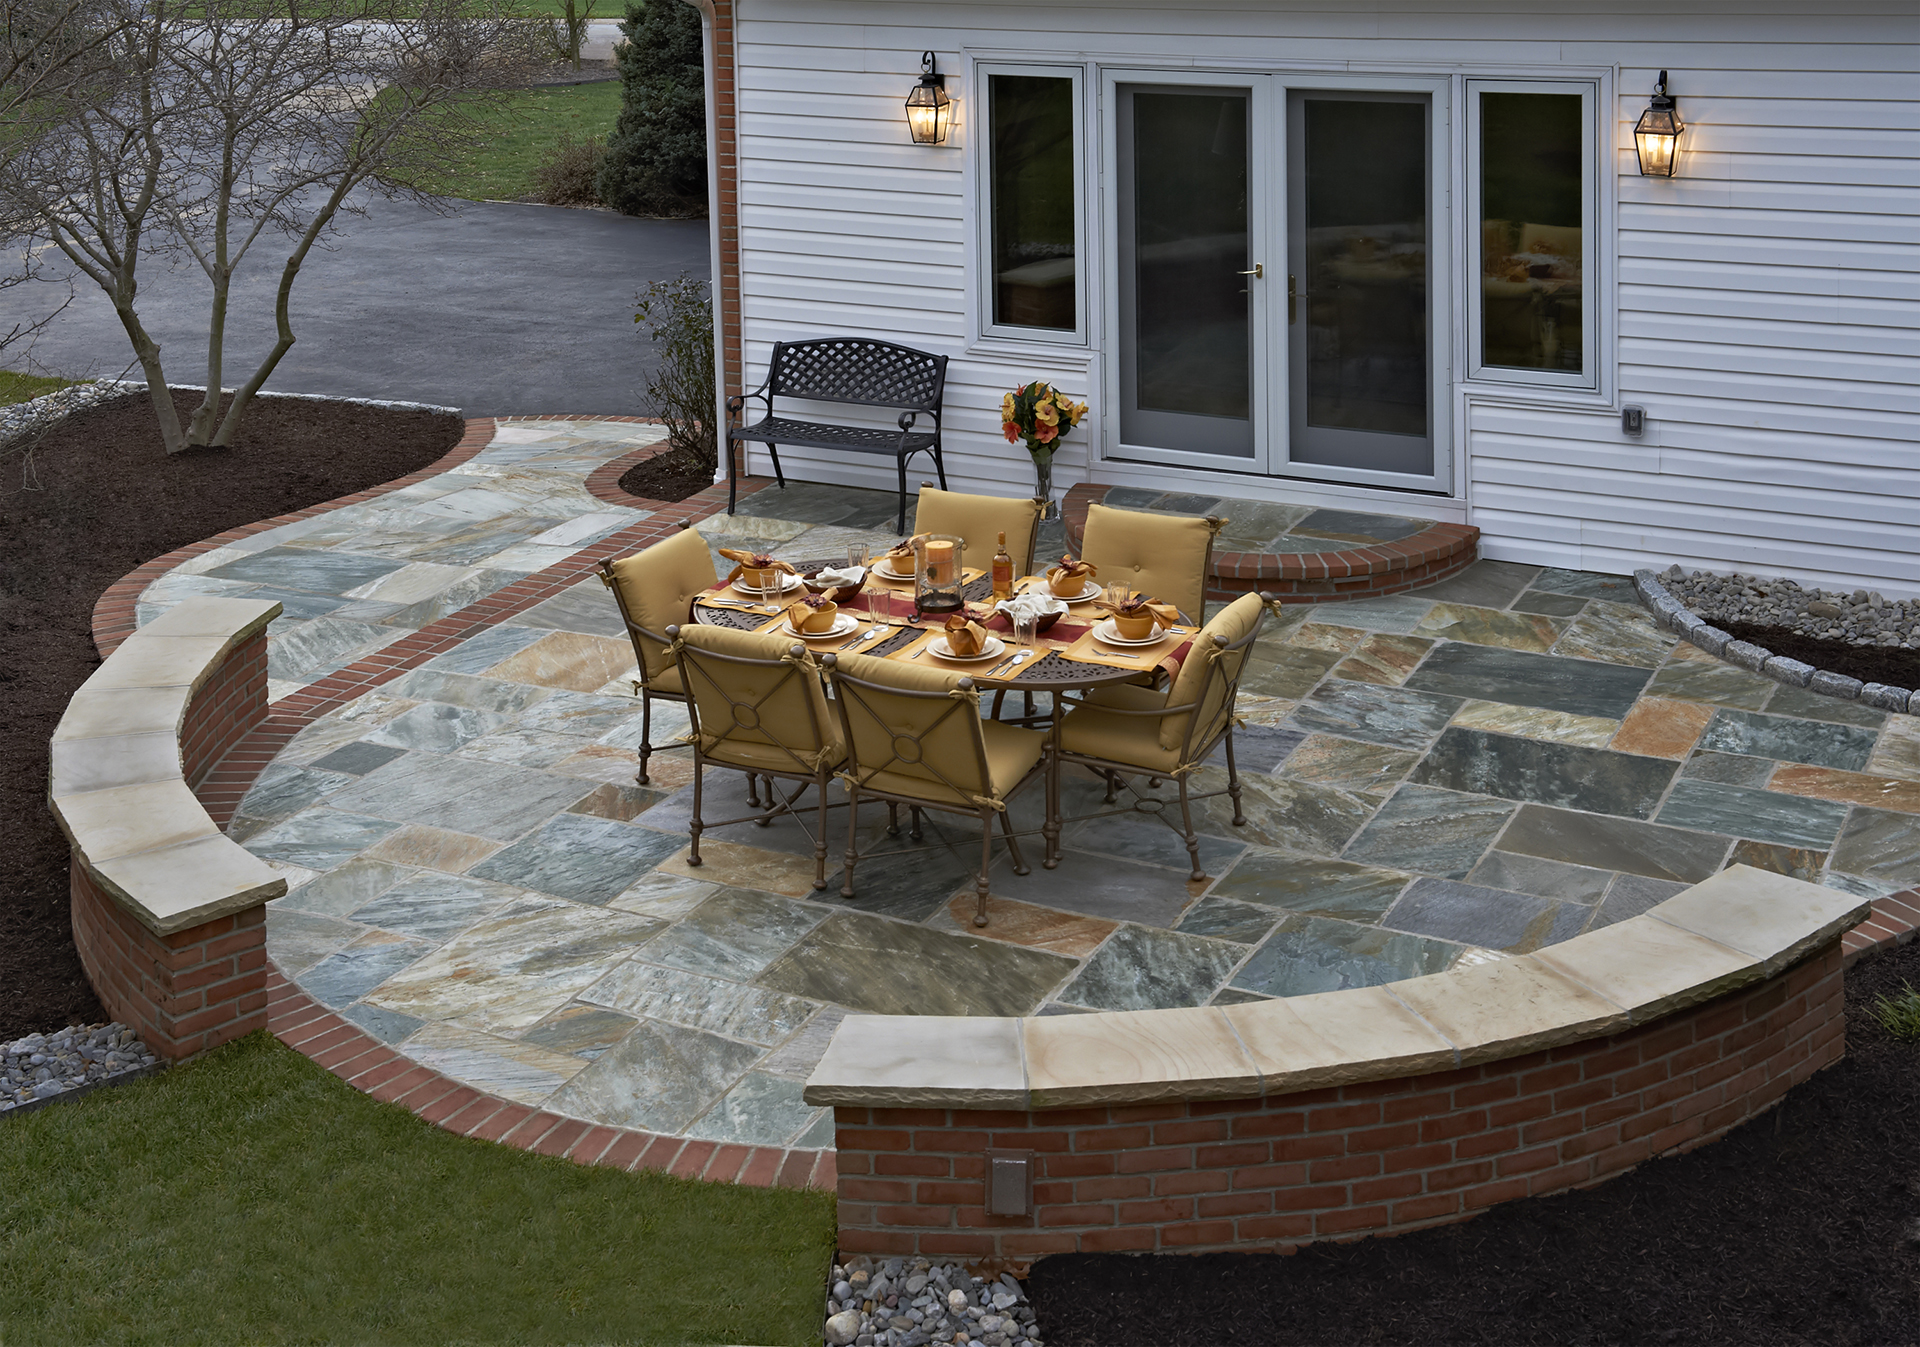 Natural stone (typically referred to as flagstone or slate)